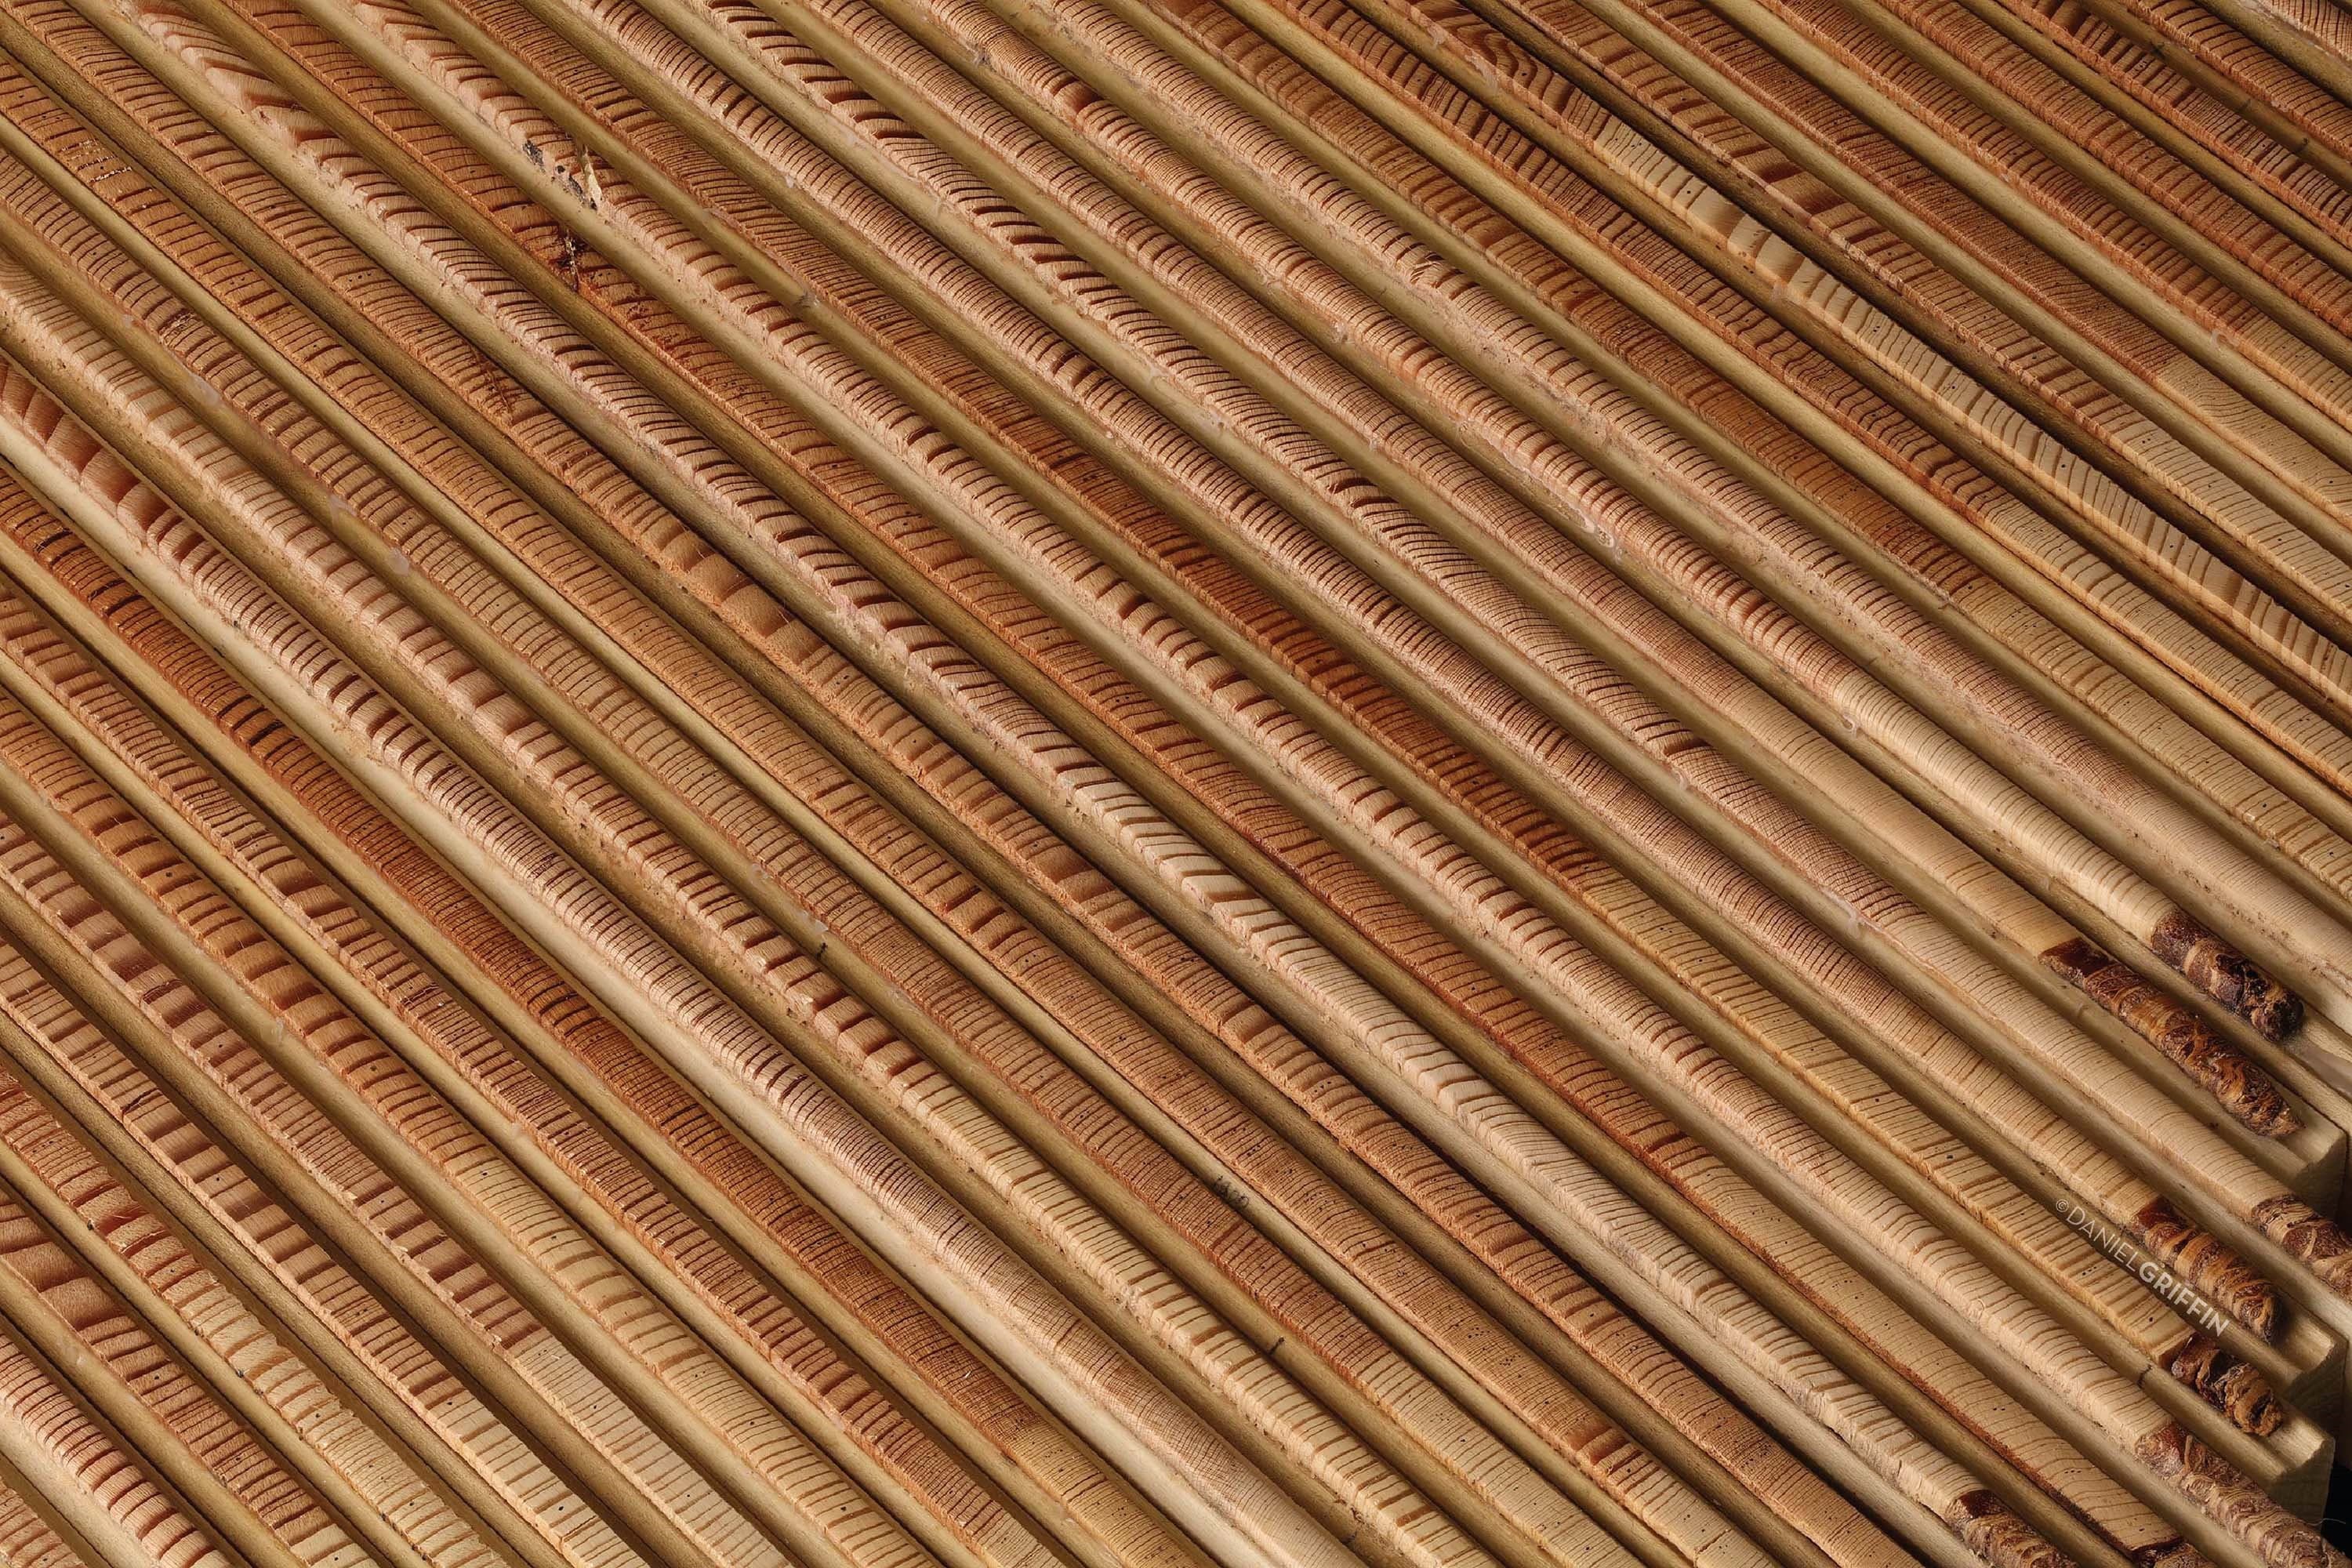 Tree-ring increment cores collected from bigcone Douglas fir trees growing on Mount Pinos in Southern California. Each growth ring is a couplet of light colored spring wood and dark colored summer wood. Wide rings form in wet years and narrow rings form in dry years. (Daniel Griffin 2022)